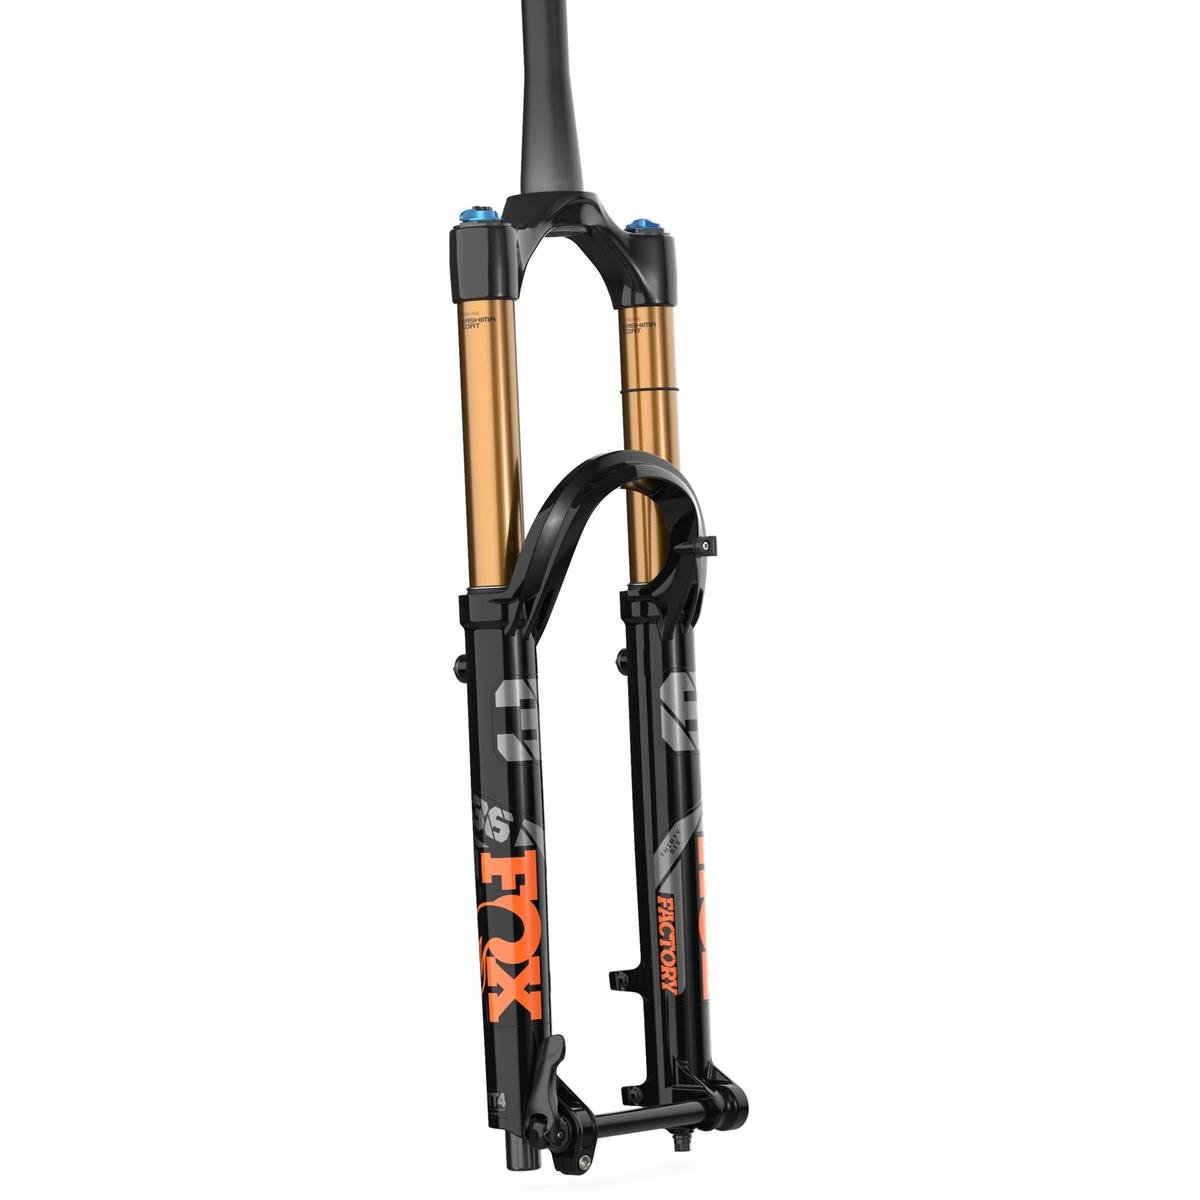 Fox Racing Shox Forcella 36 Float Factory Kashima 27.5 Pollici, 15x110 mm, FIT4, 44 mm Offset, 160 mm